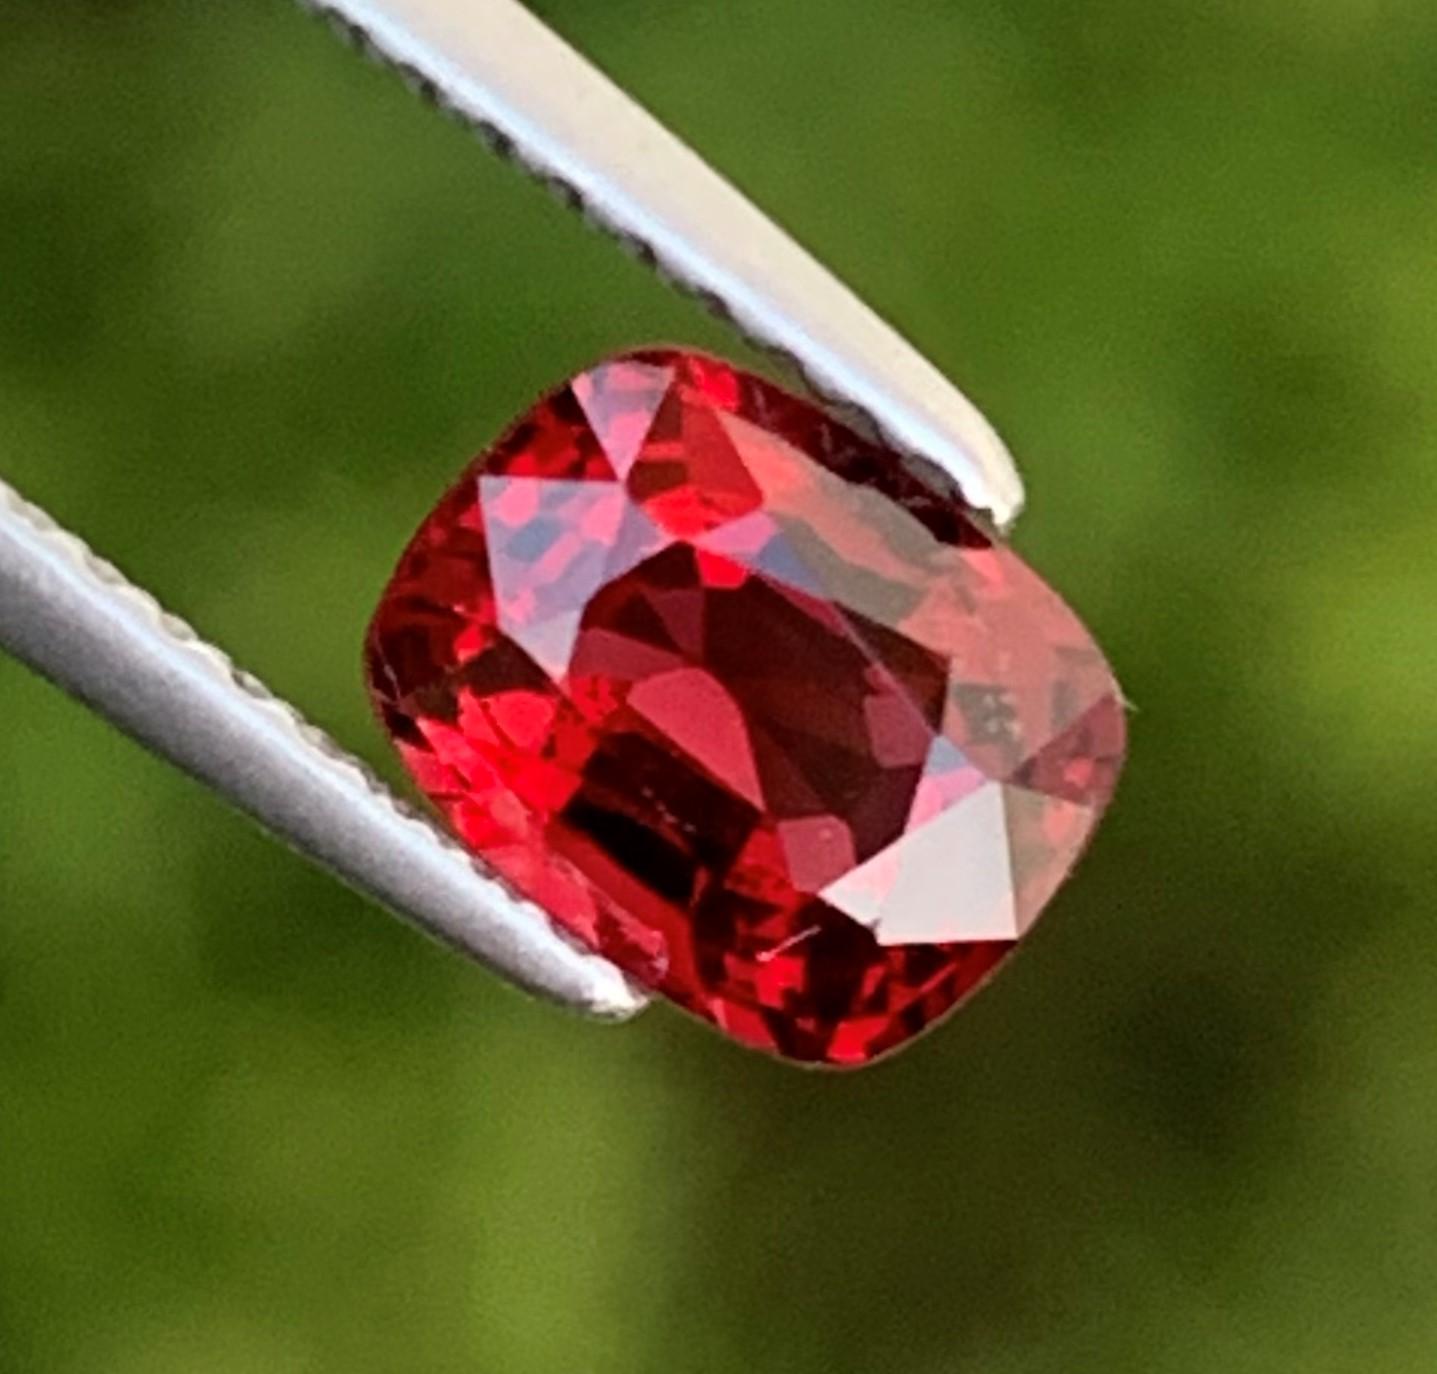 Loose Spinel
Weight : 1.05 Carats
Dimensions : 6.8x5.4x3.7 Mm
Origin : Burma Myanmar
Clarity : Eye Clean
Shape: Cushion Cut
Treatment: Non
Certificate: On demand
The red spinel gemstone is linked to the root chakra and is beneficial in boosting